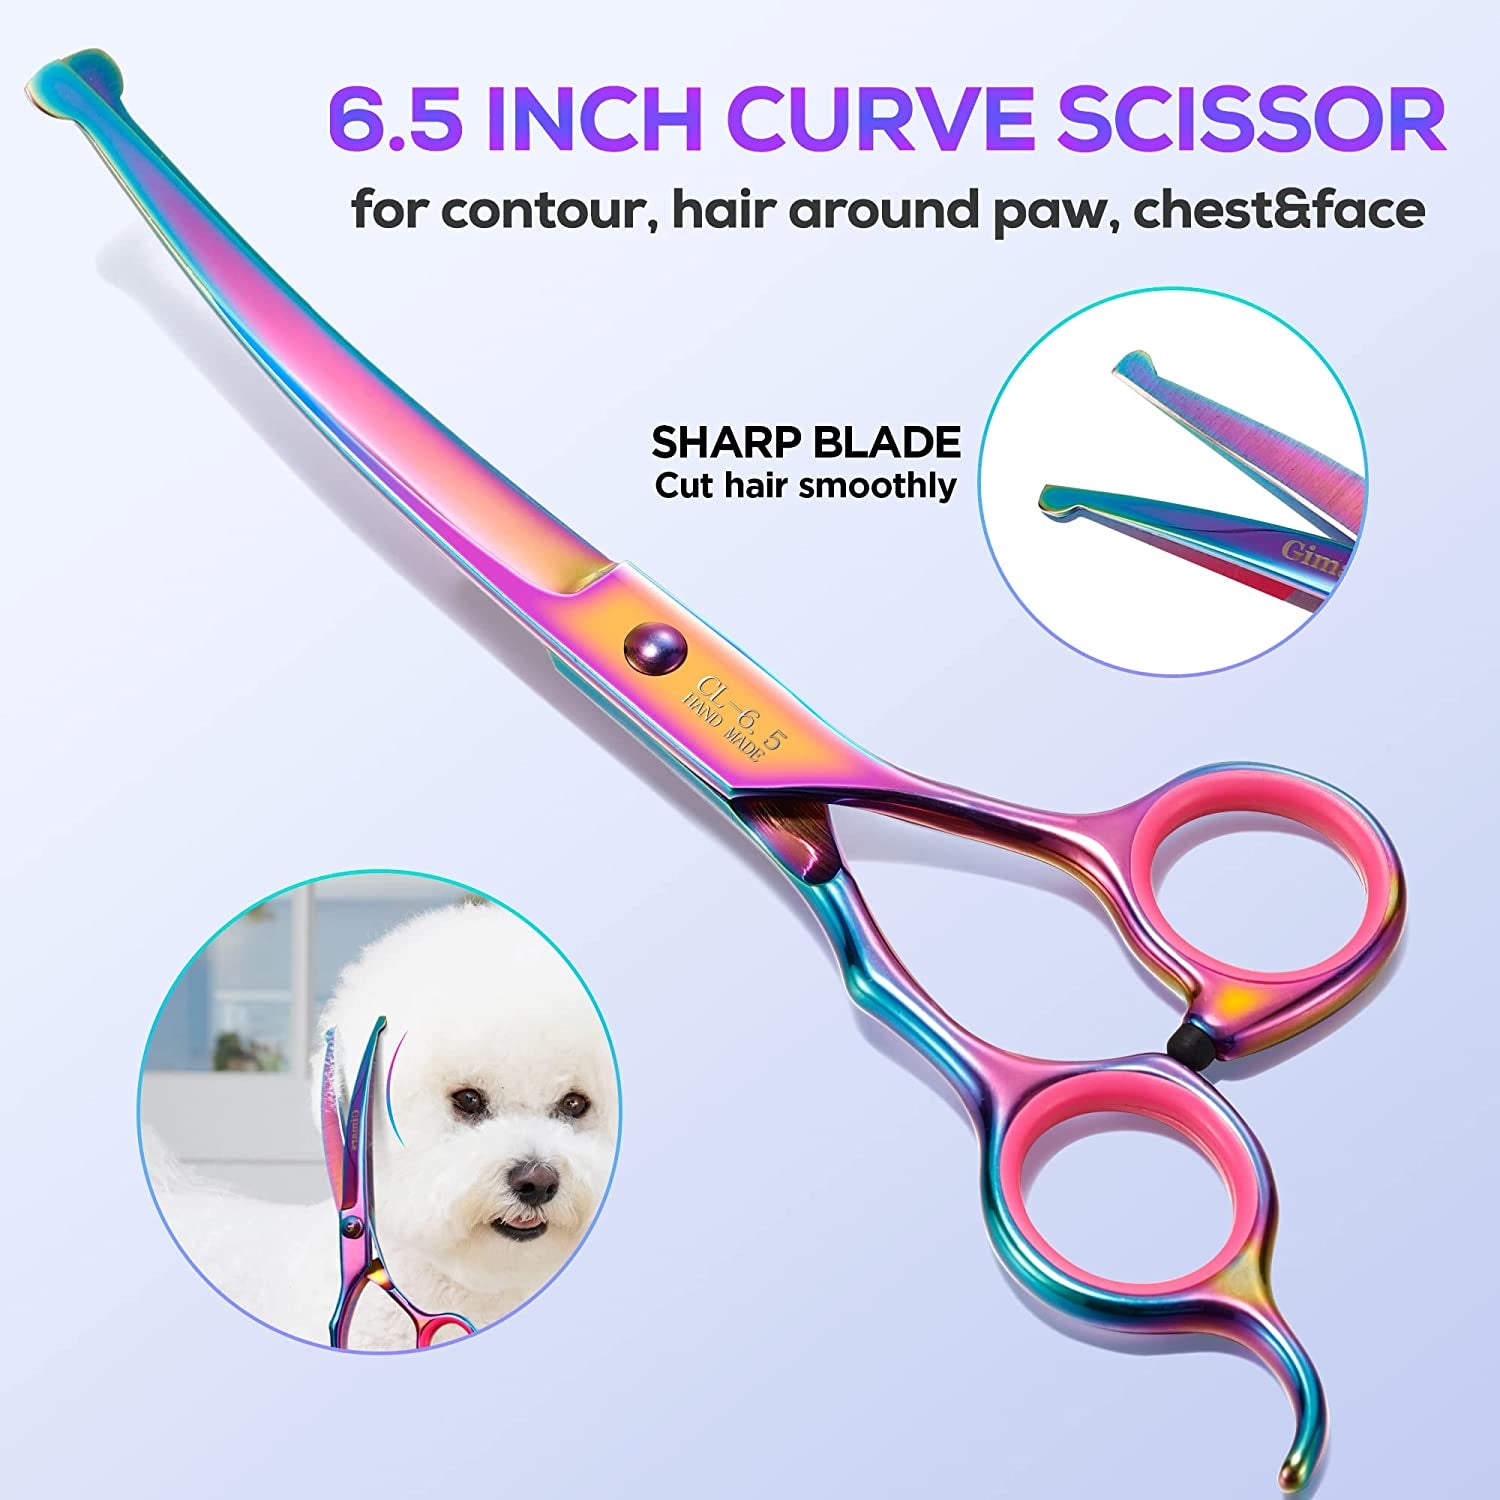 Professional 4CR Stainless Steel 6 in 1 Grooming Scissors for Dogs with Safety round Tip, Heavy Duty Titanium Coated Pet Grooming Scissor for Dogs, Cats and Other Animals